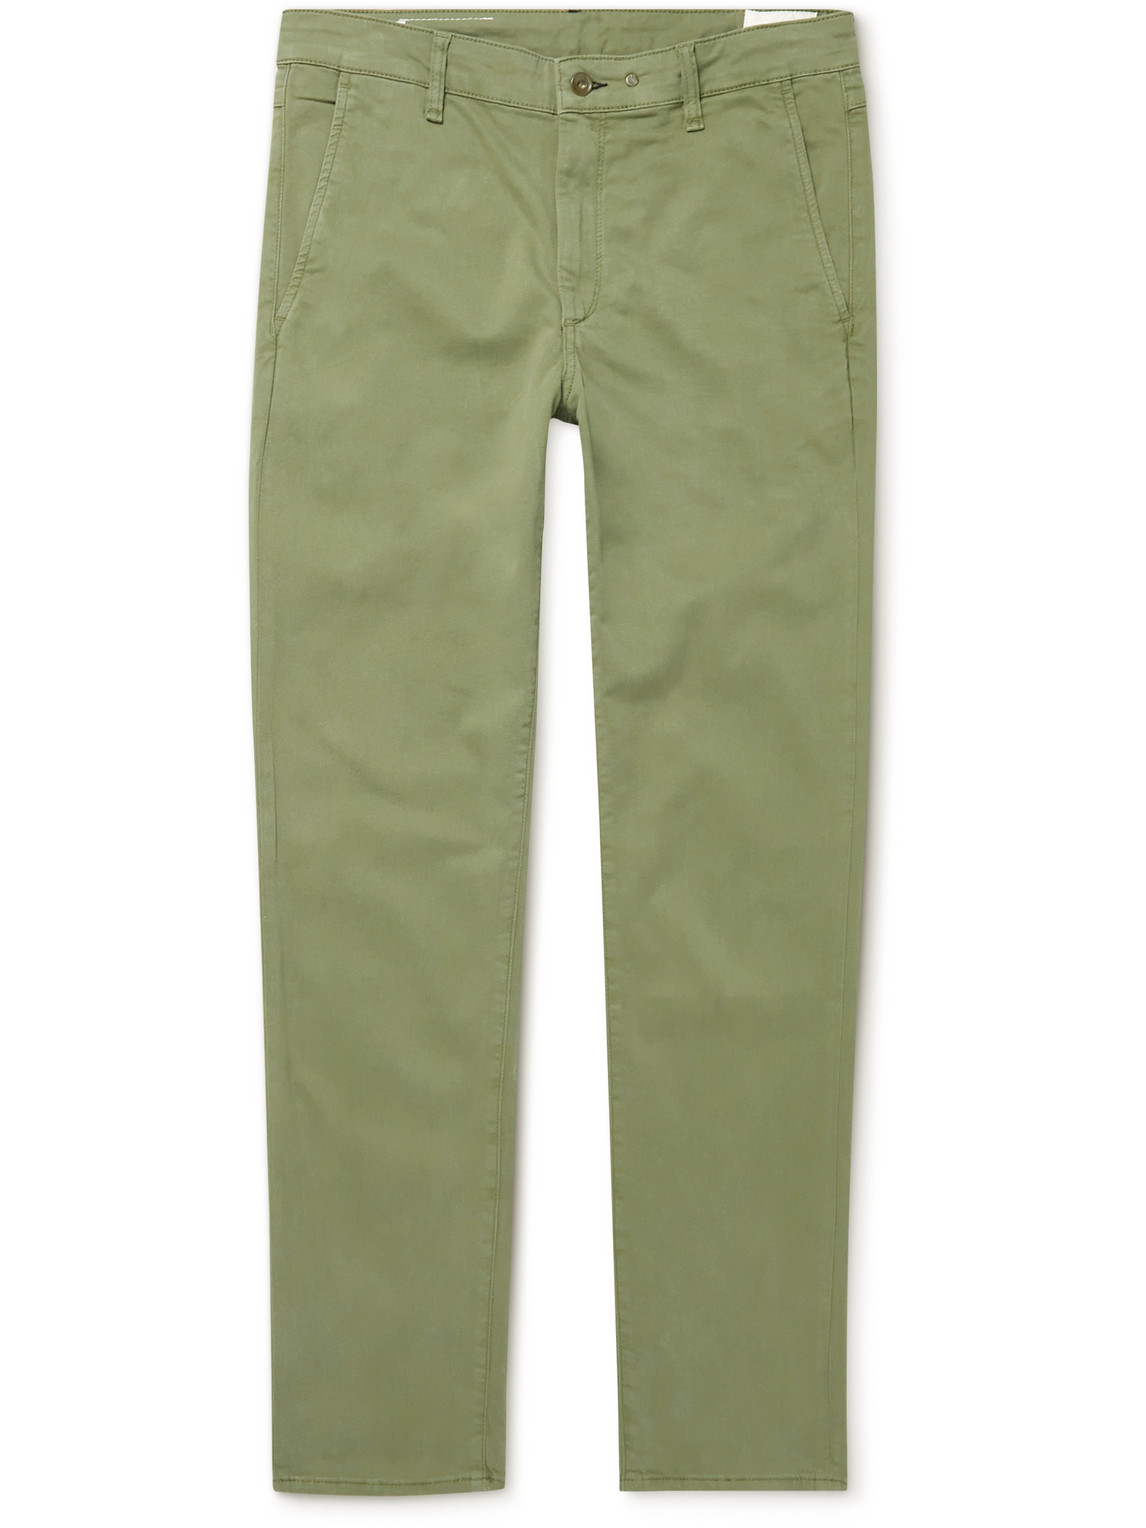 Fit 2 Slim-Fit Garment-Dyed Stretch-Cotton Twill Chinos